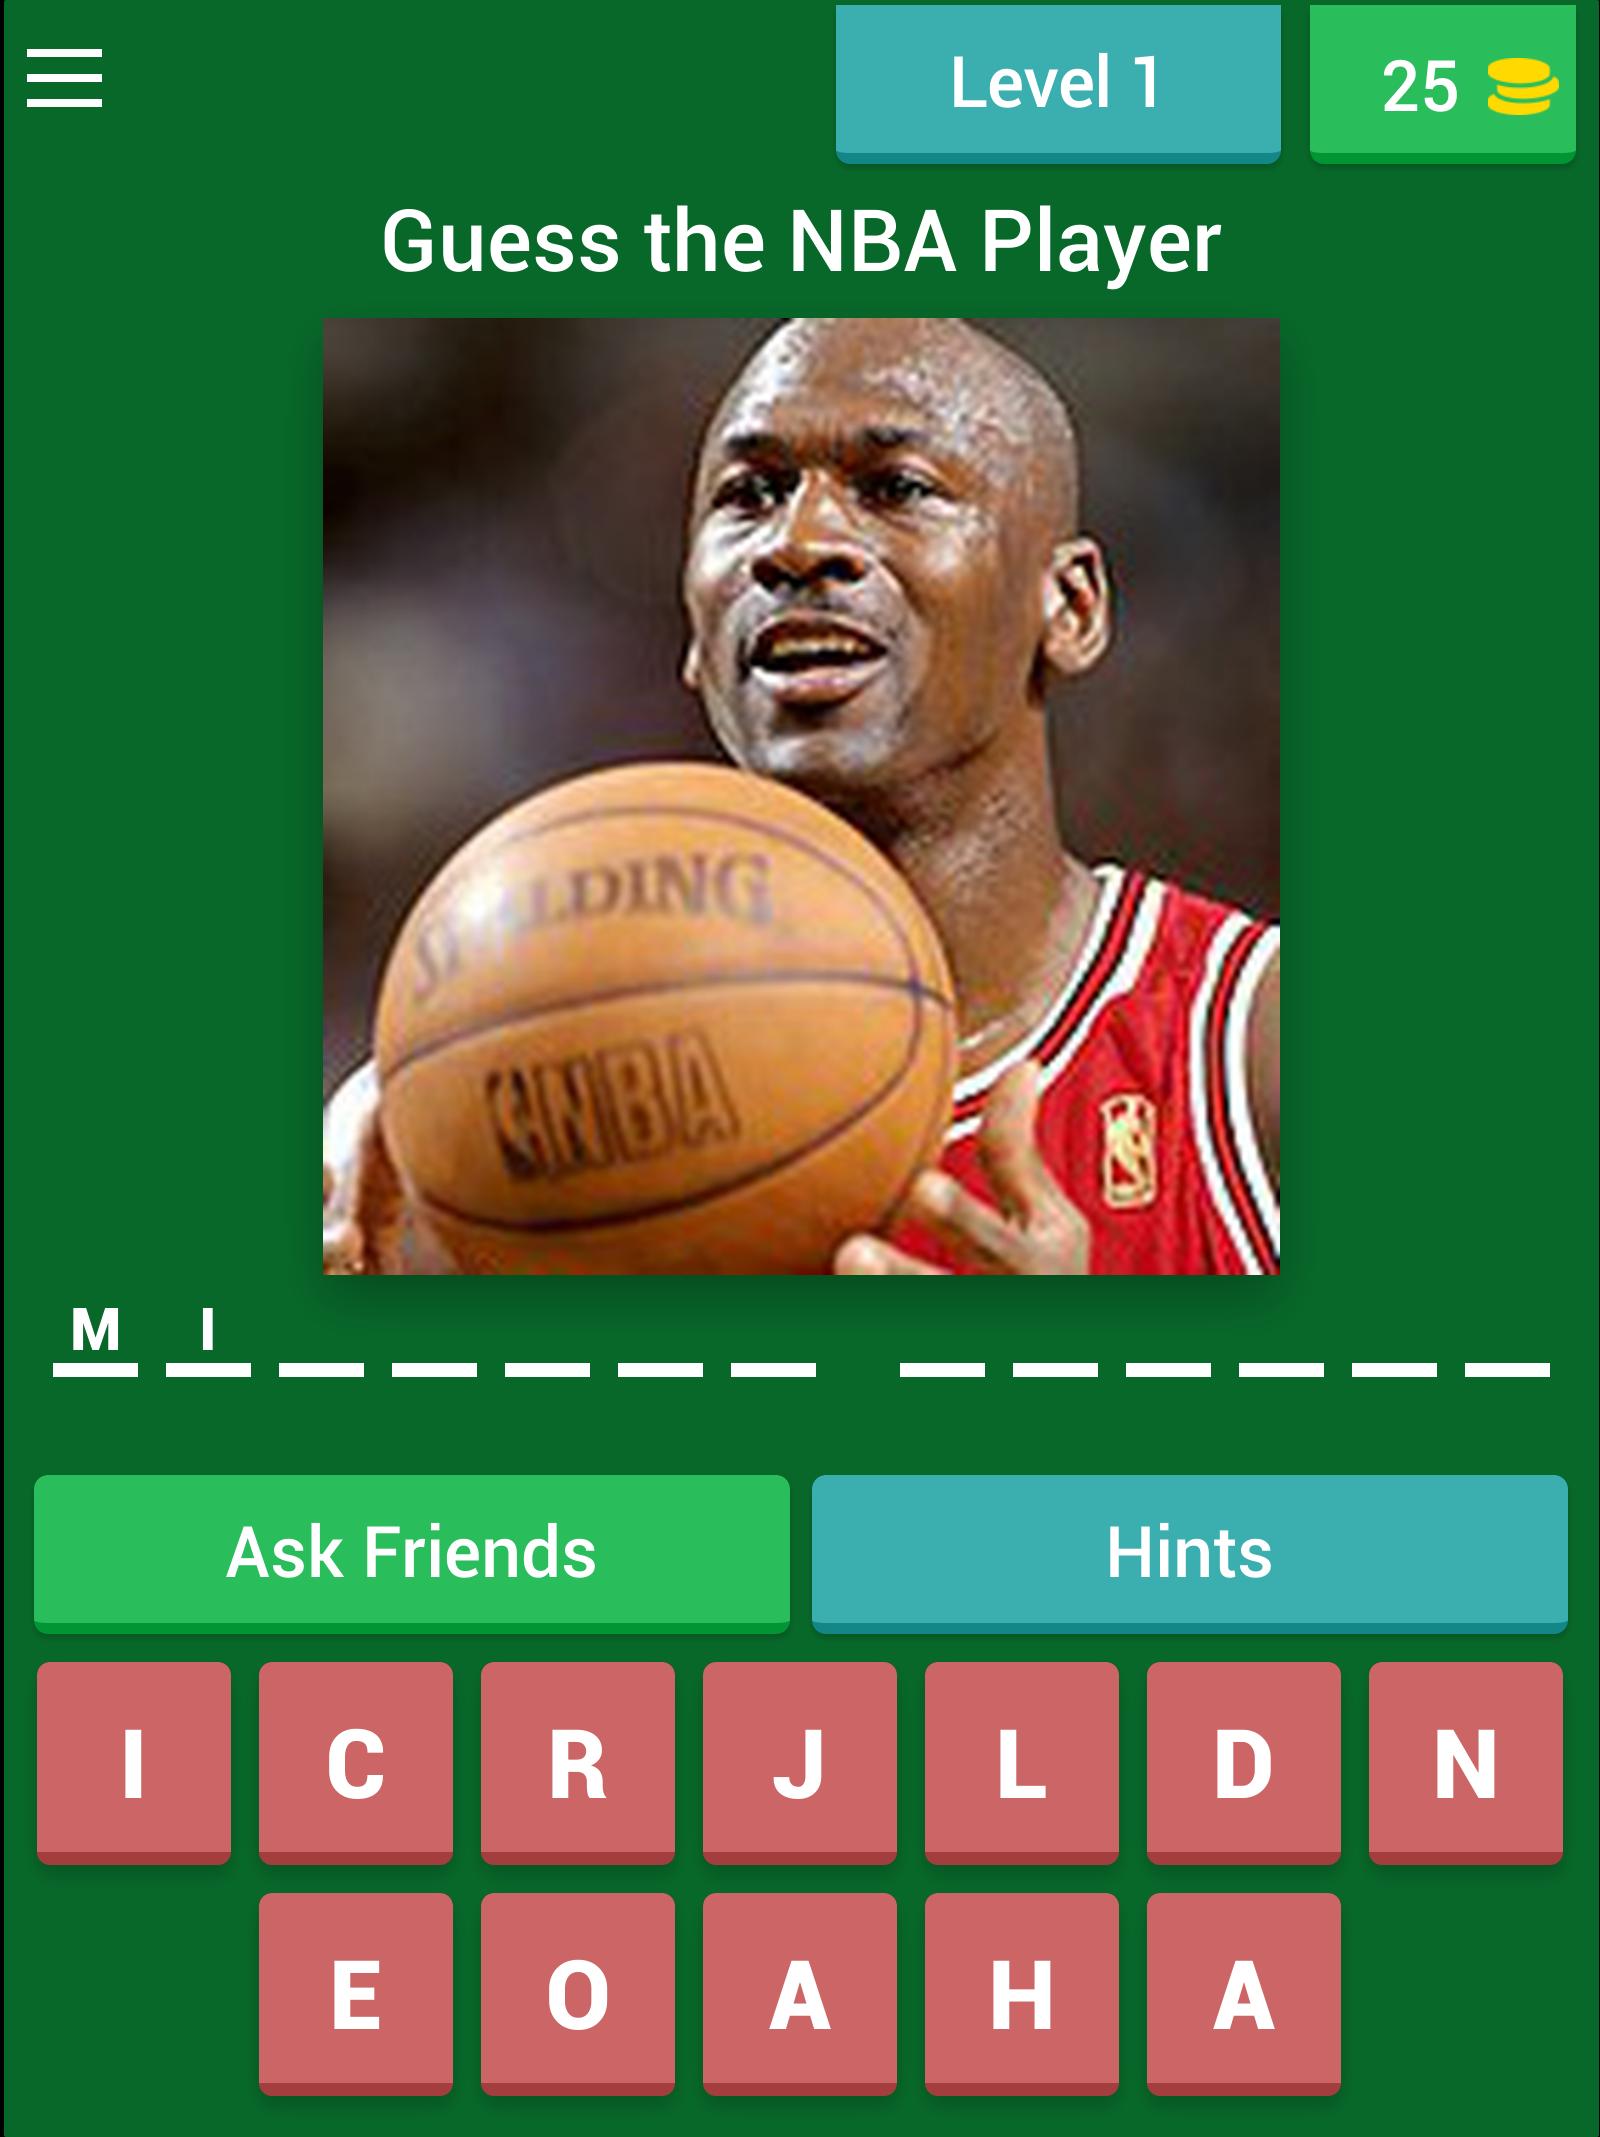 Guess The NBA Player! for Android - APK Download